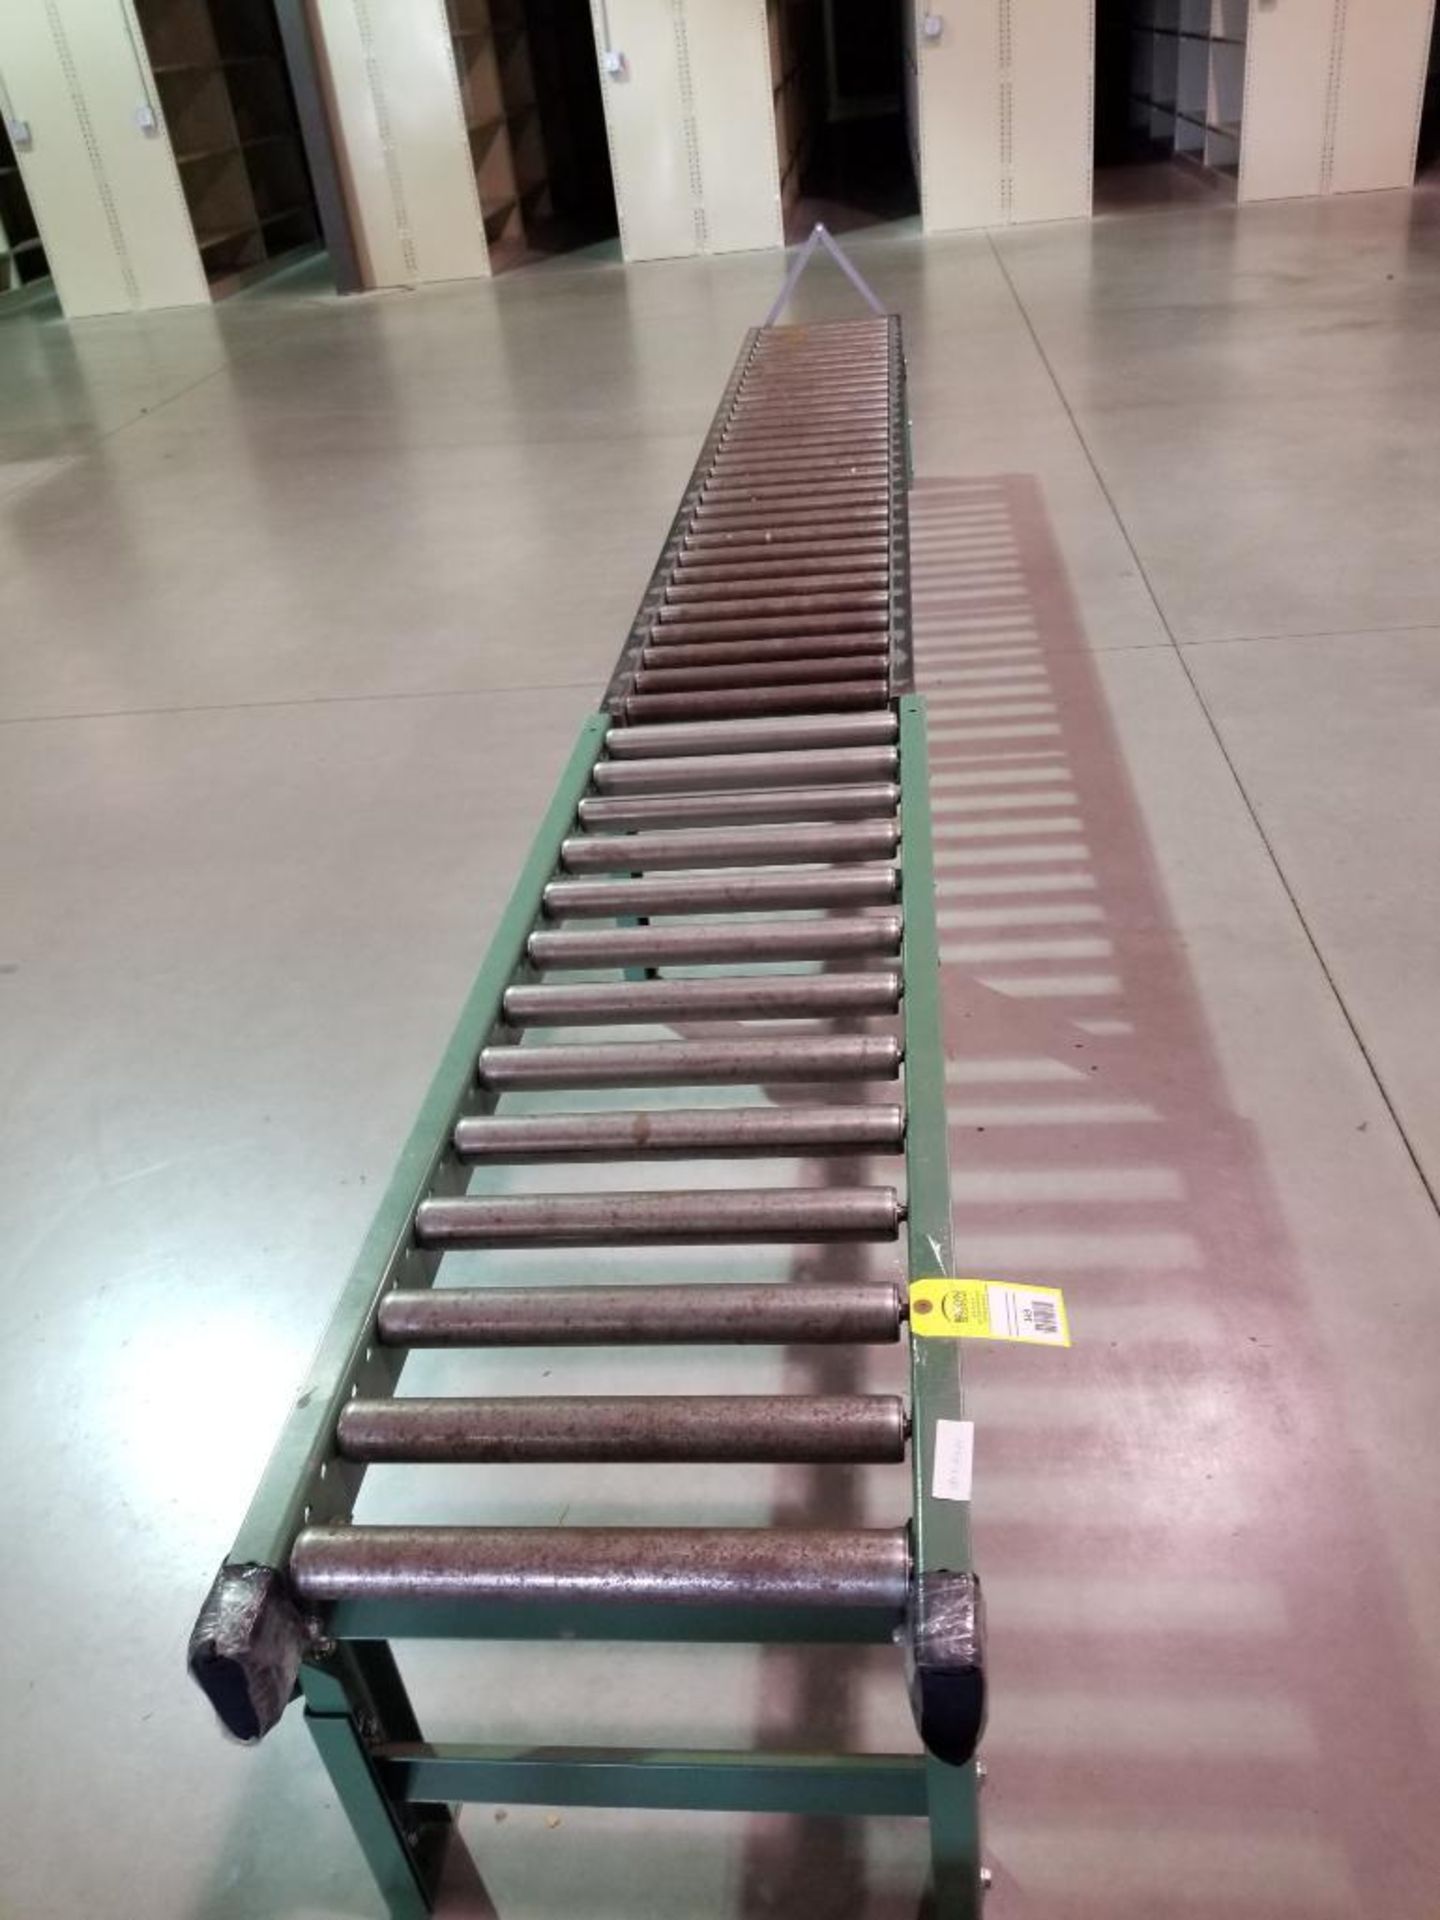 15ft roller conveyor section. 20in wide by 20in tall. (legs are adjustable to change height) - Image 2 of 2